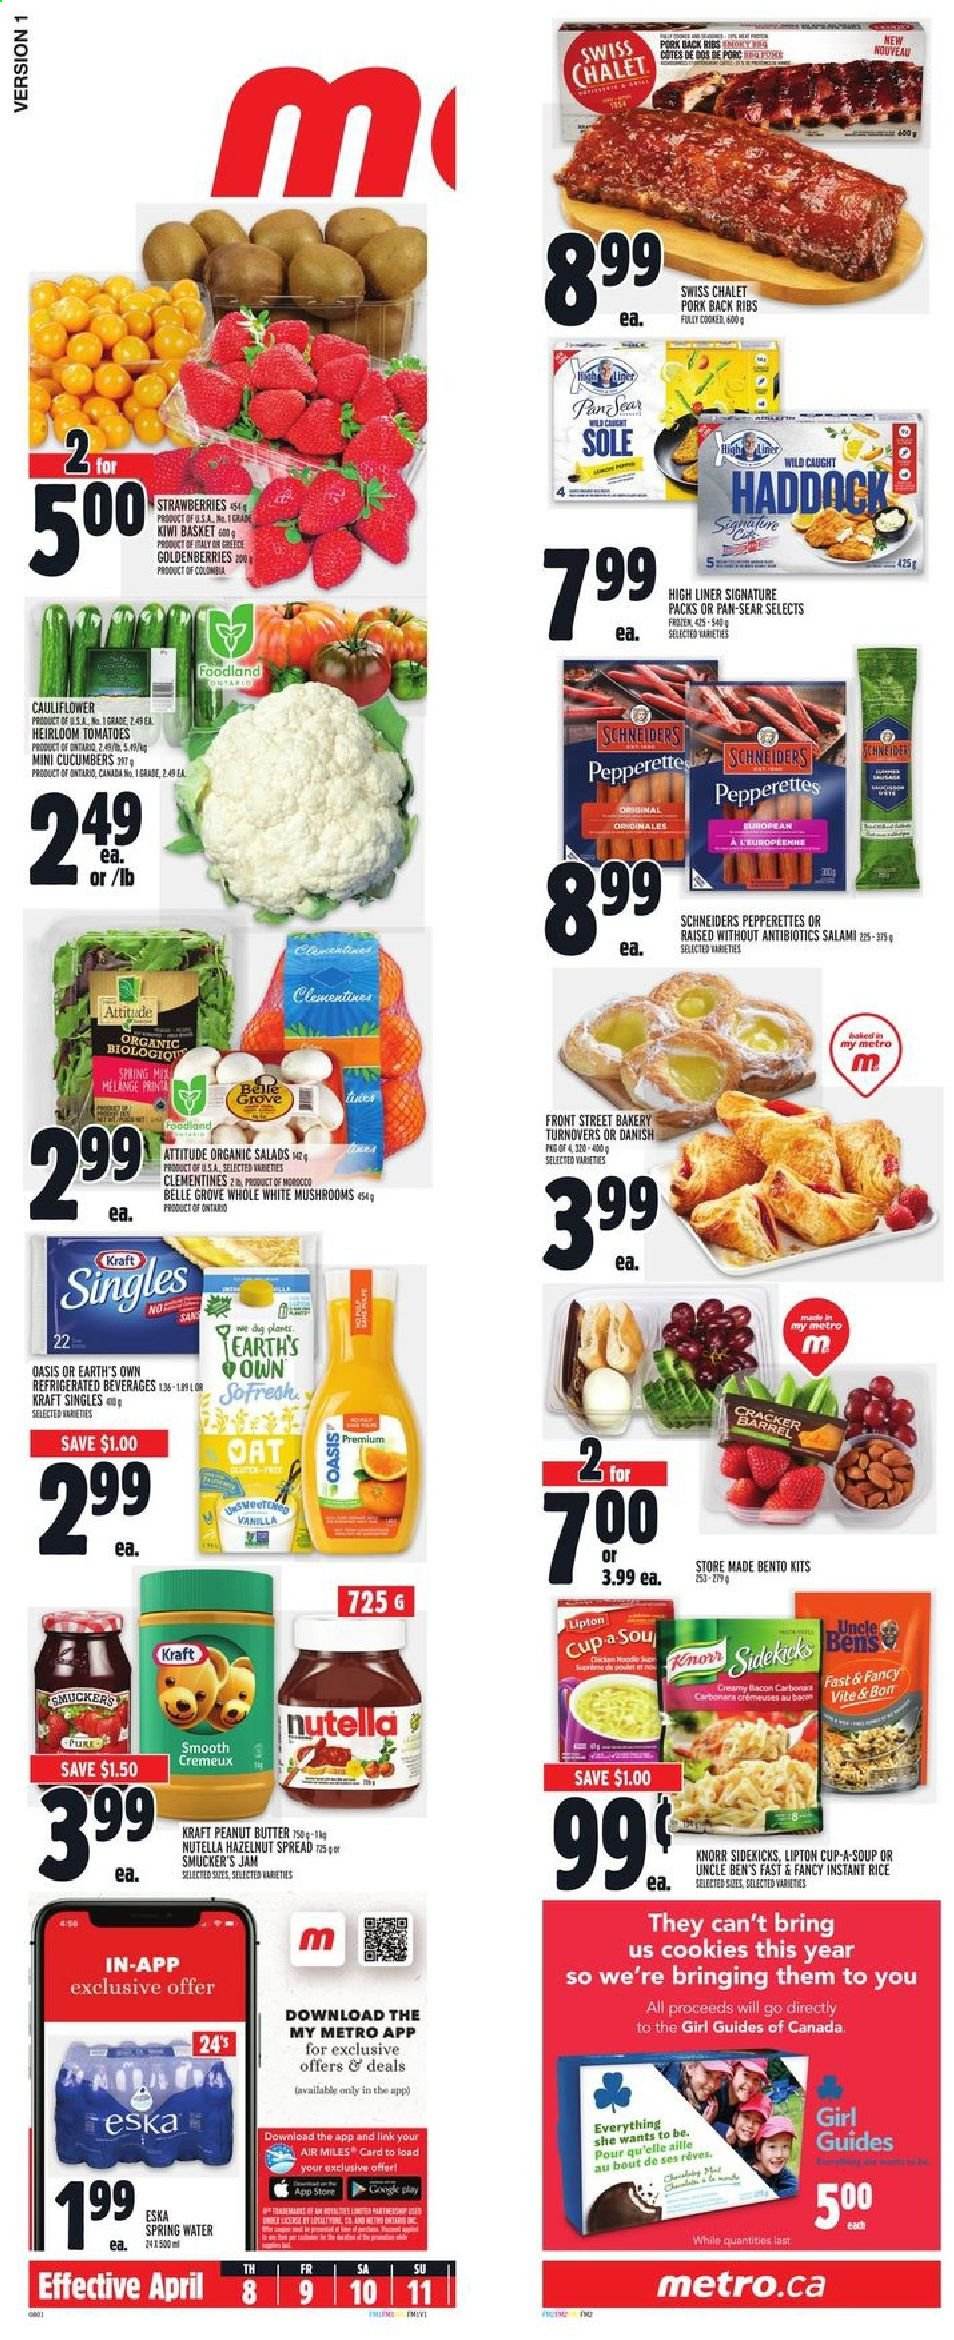 thumbnail - Metro Flyer - April 08, 2021 - April 14, 2021 - Sales products - mushrooms, turnovers, cauliflower, cucumber, tomatoes, salad, clementines, strawberries, soup, Kraft®, bacon, salami, sandwich slices, Kraft Singles, cookies, oats, Uncle Ben's, rice, fruit jam, peanut butter, hazelnut spread, spring water, pork meat, pork ribs, pork back ribs, pan, cup, Knorr, kiwi, Nutella. Page 17.